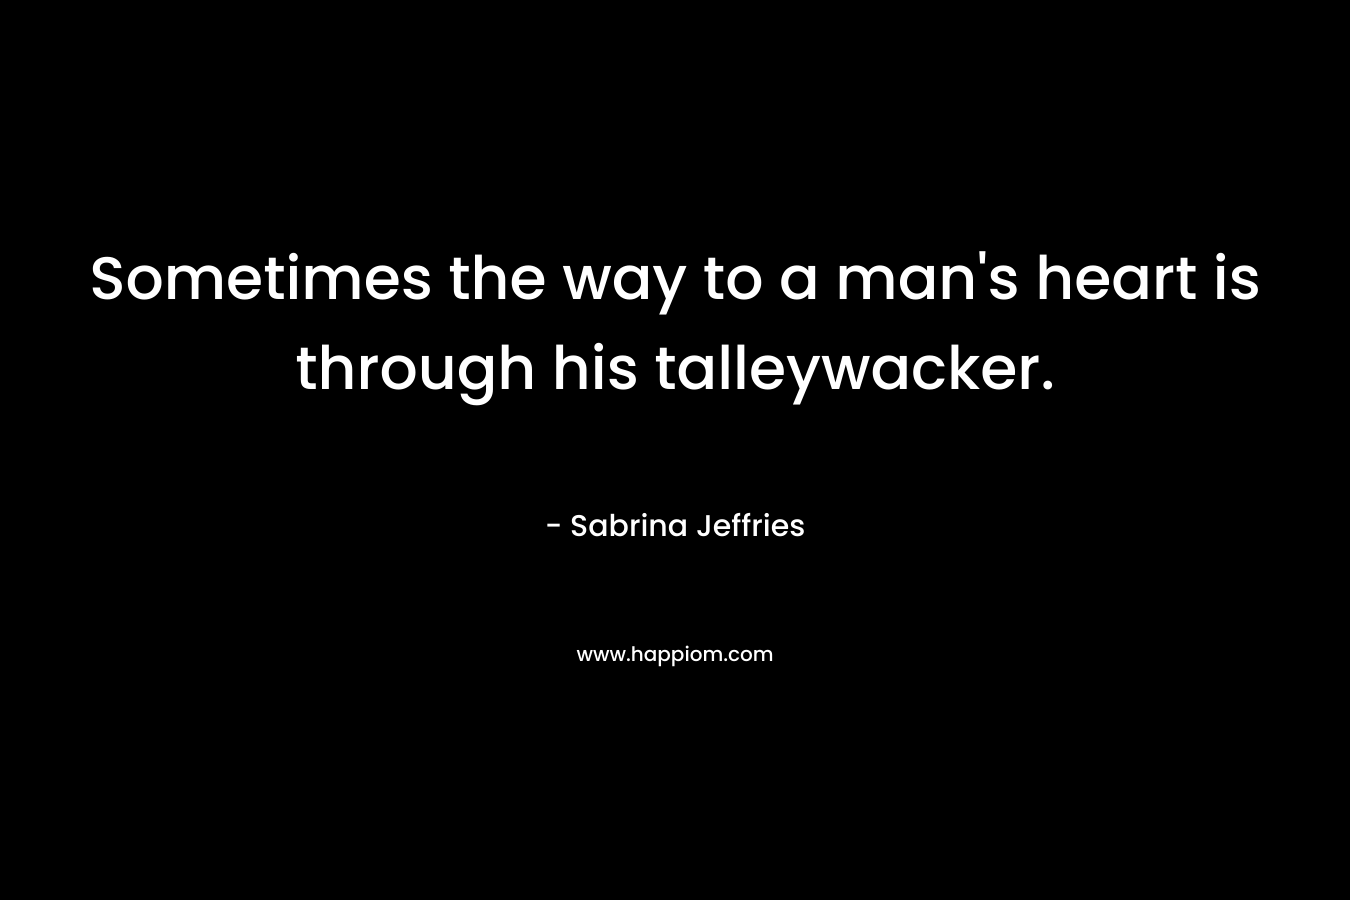 Sometimes the way to a man’s heart is through his talleywacker. – Sabrina Jeffries